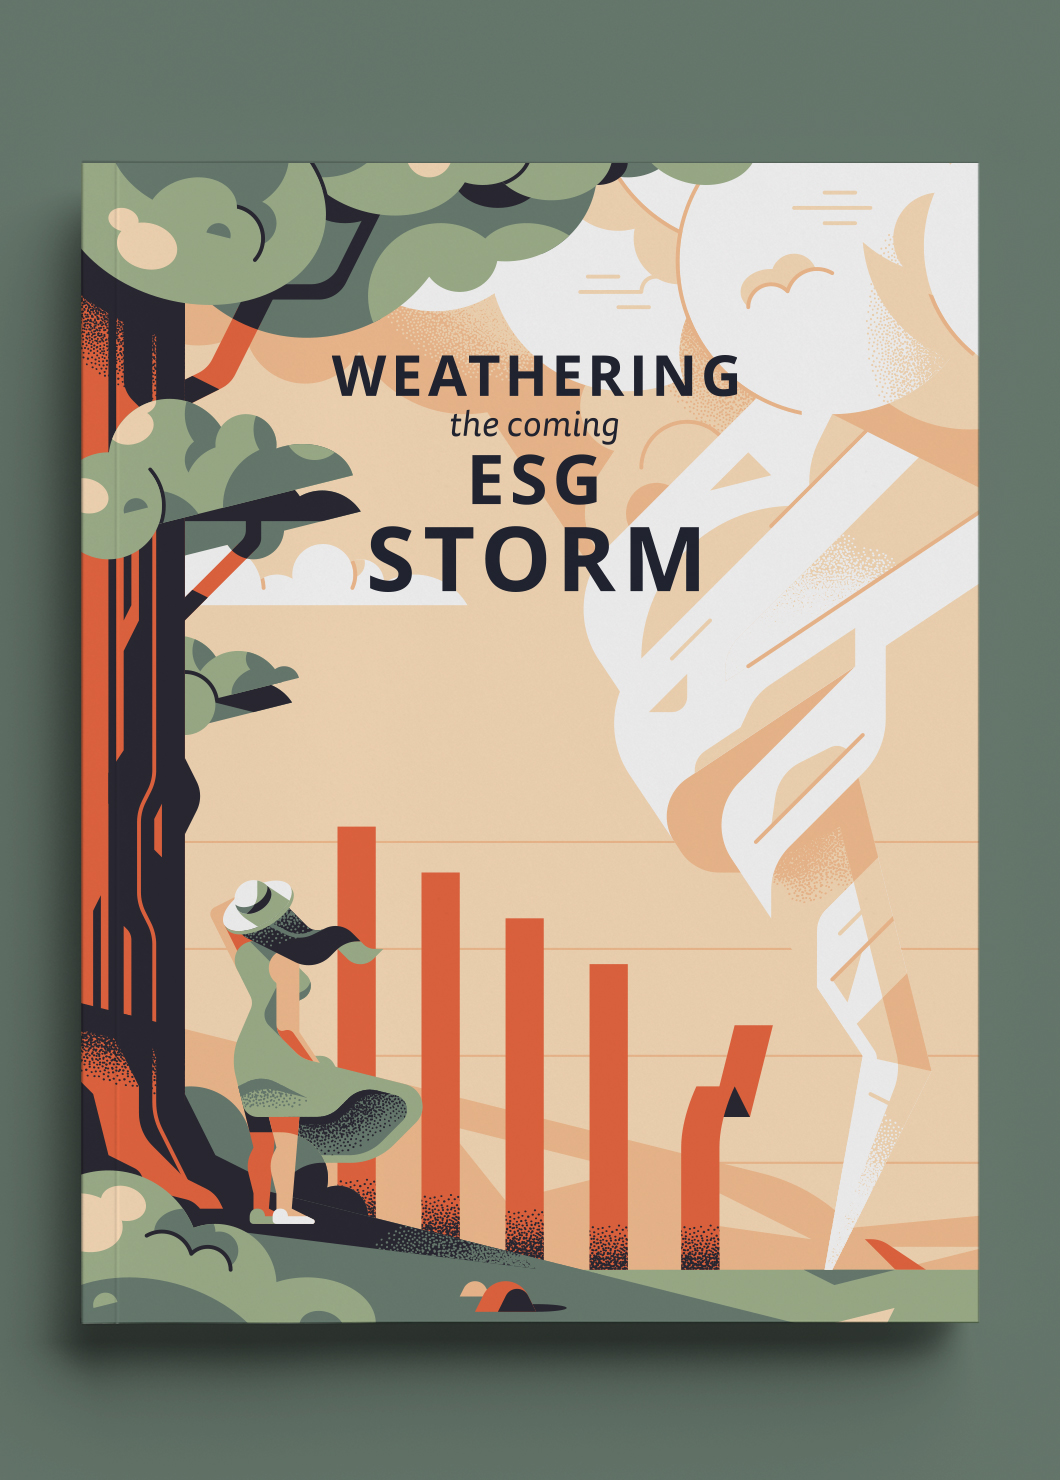 Weathering the coming ESG storm